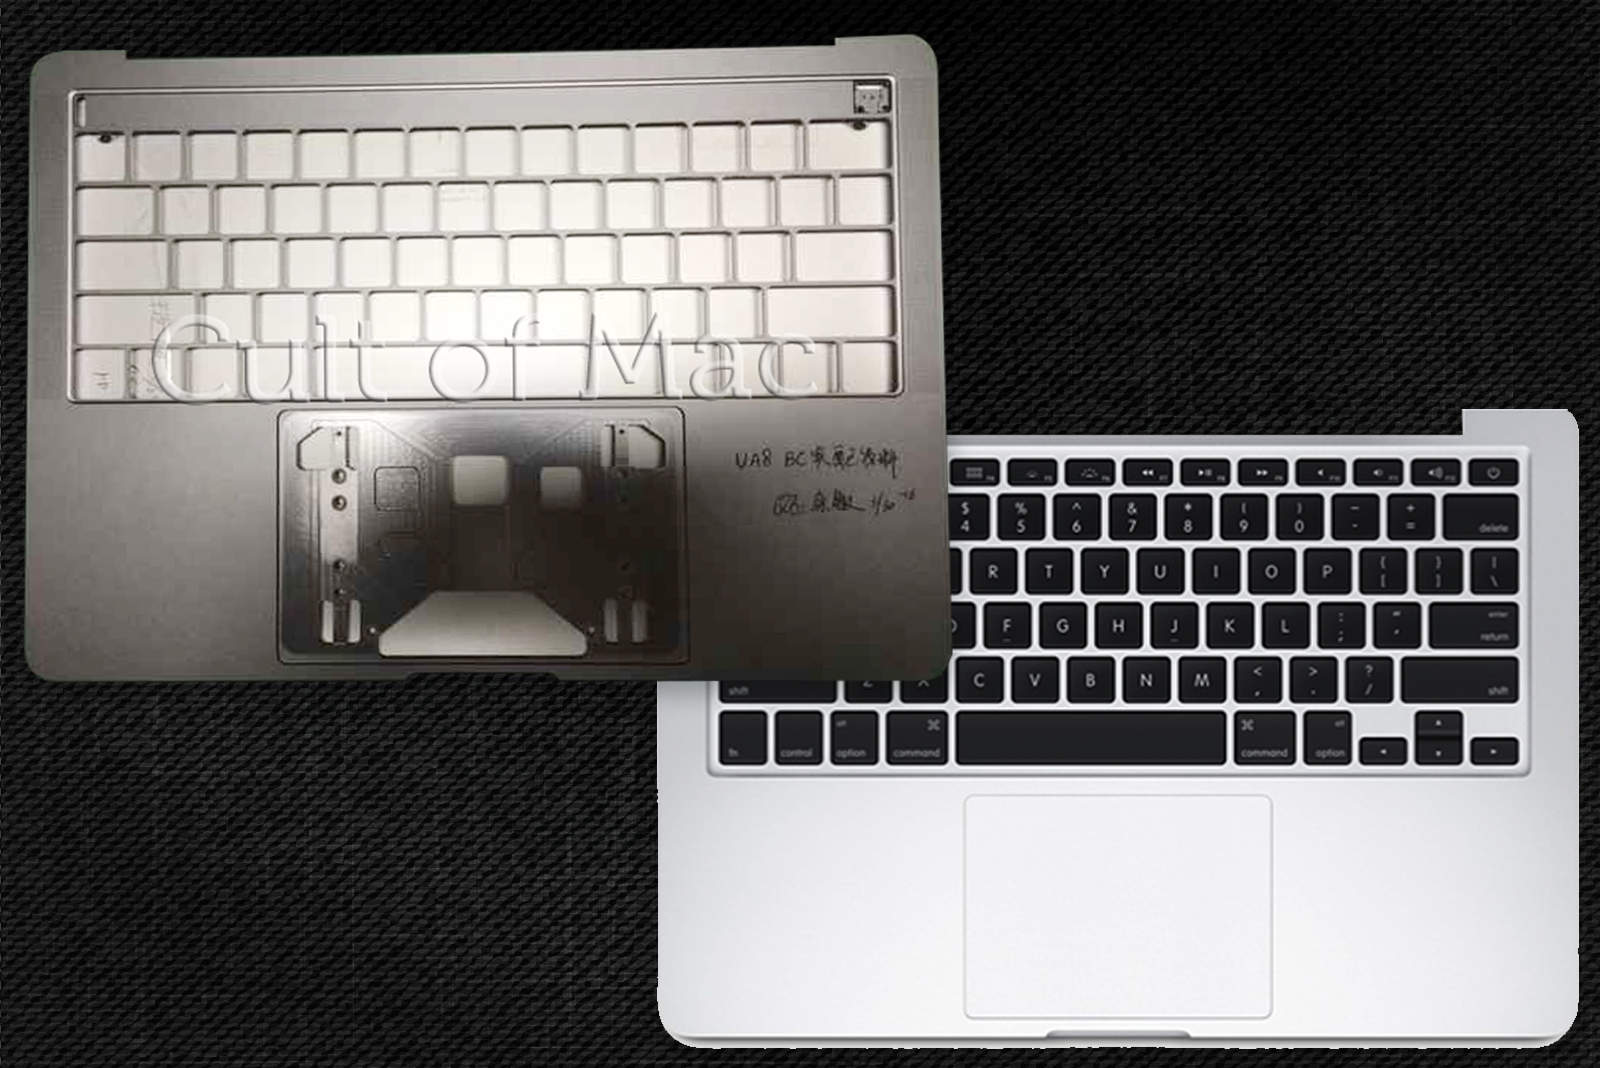 Supposed housing of the new MacBook Pro